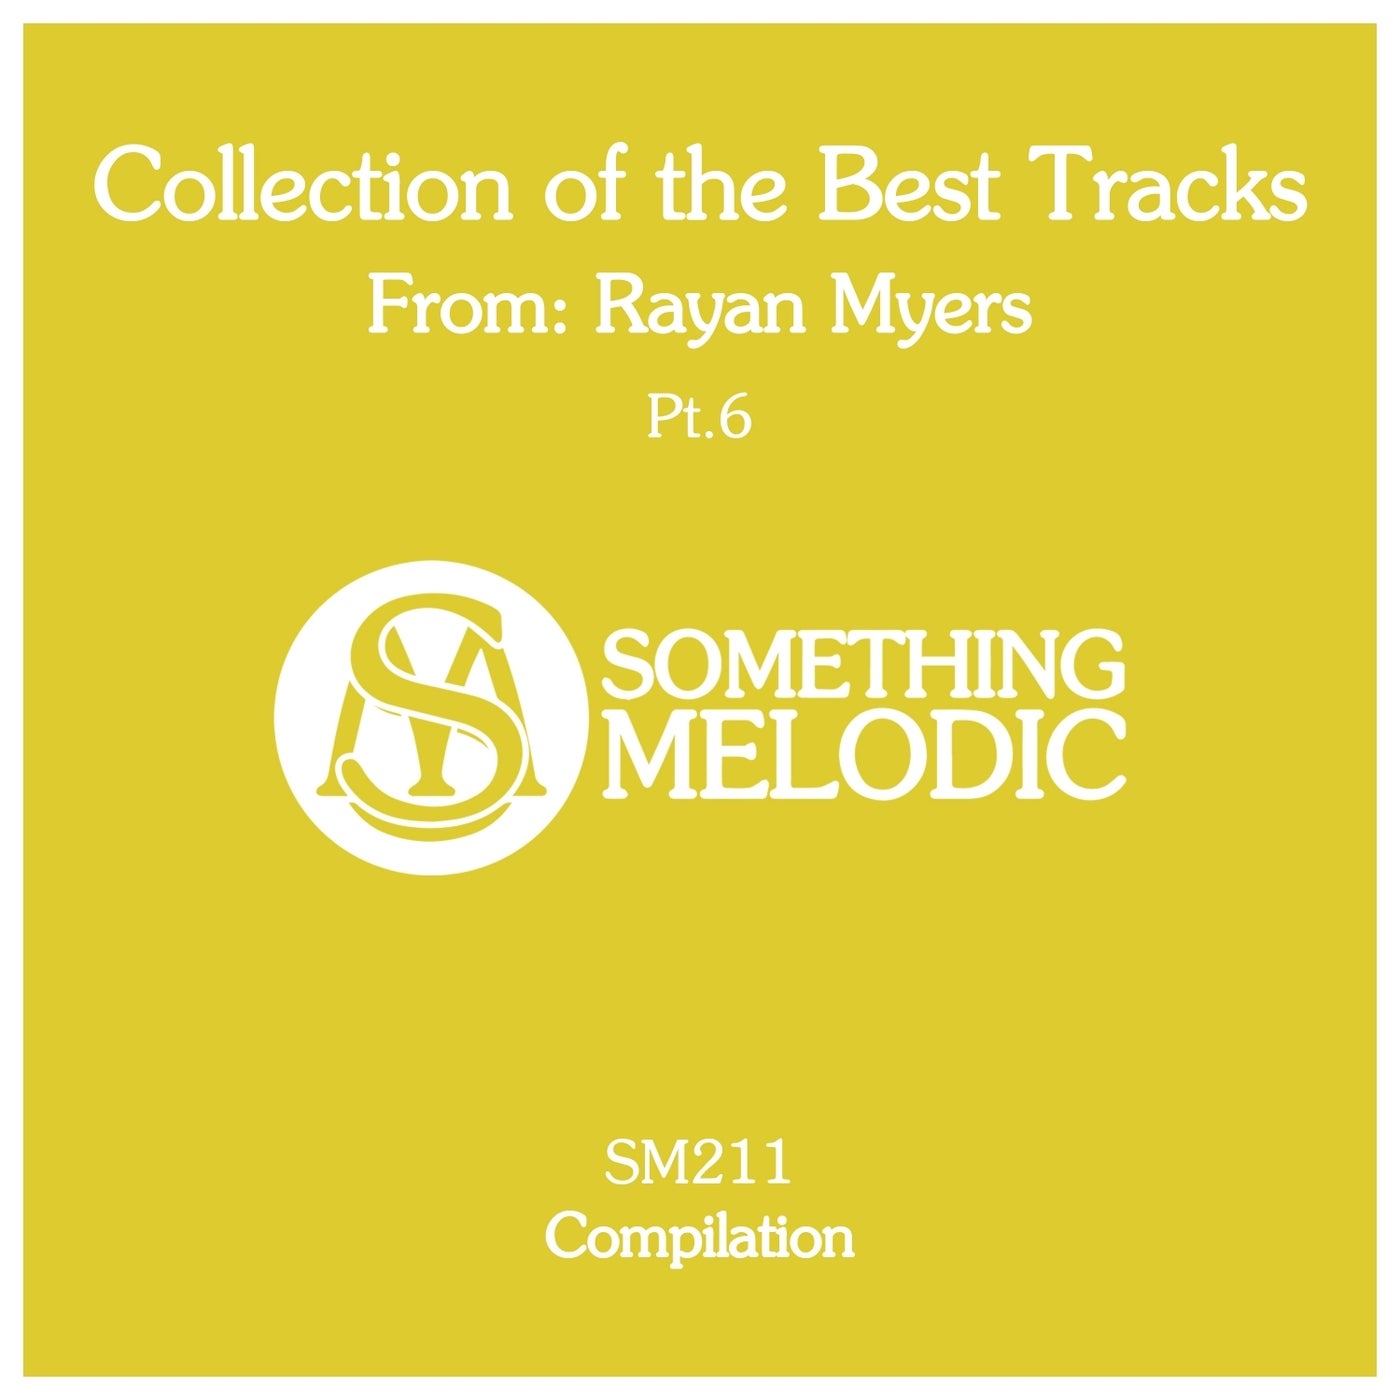 Collection of the Best Tracks From: Rayan Myers, Pt. 6